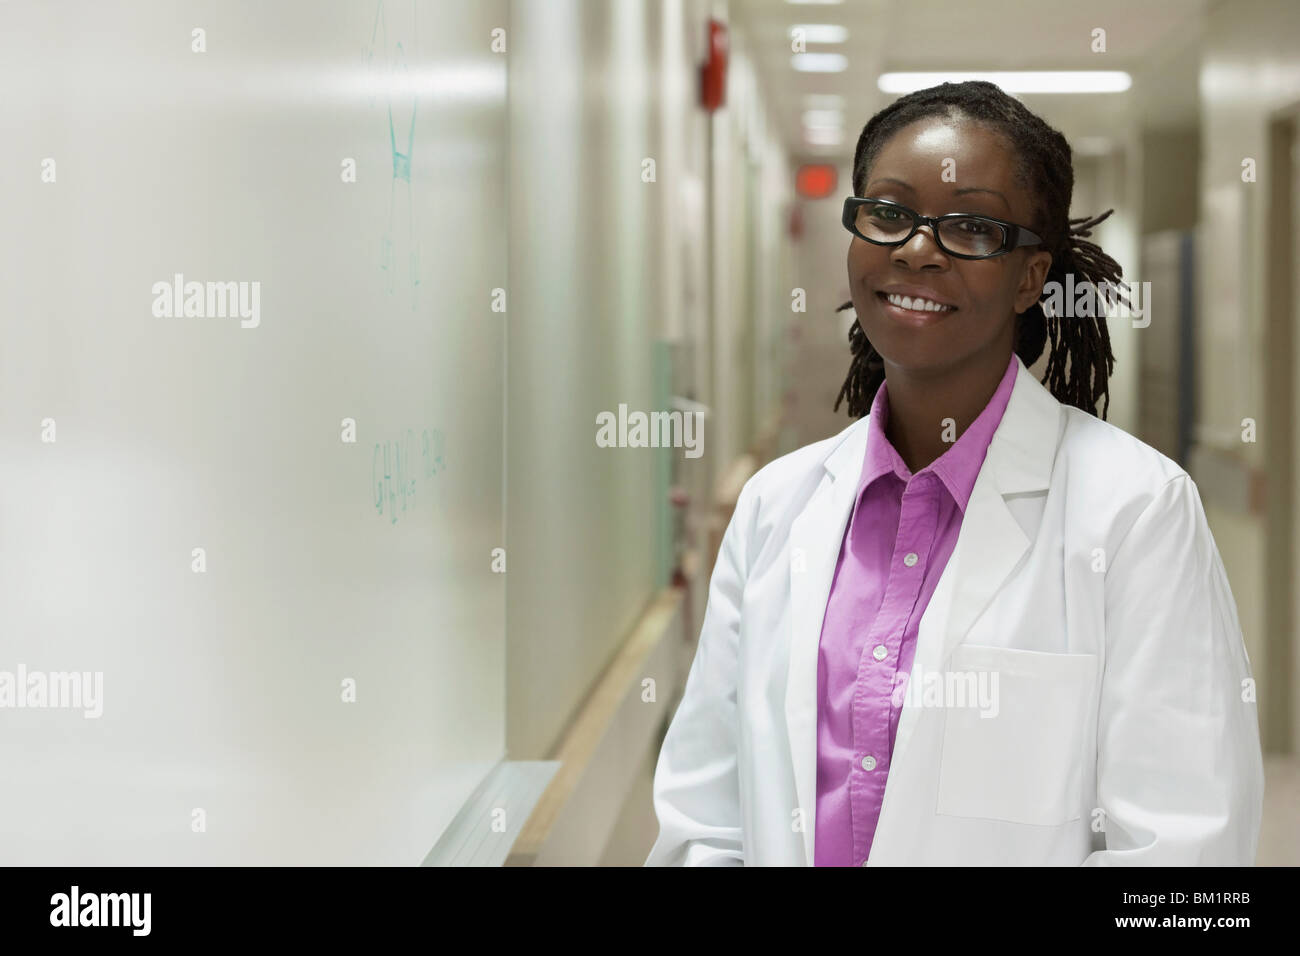 Portrait of a female doctor smiling in a hospital corridor Stock Photo